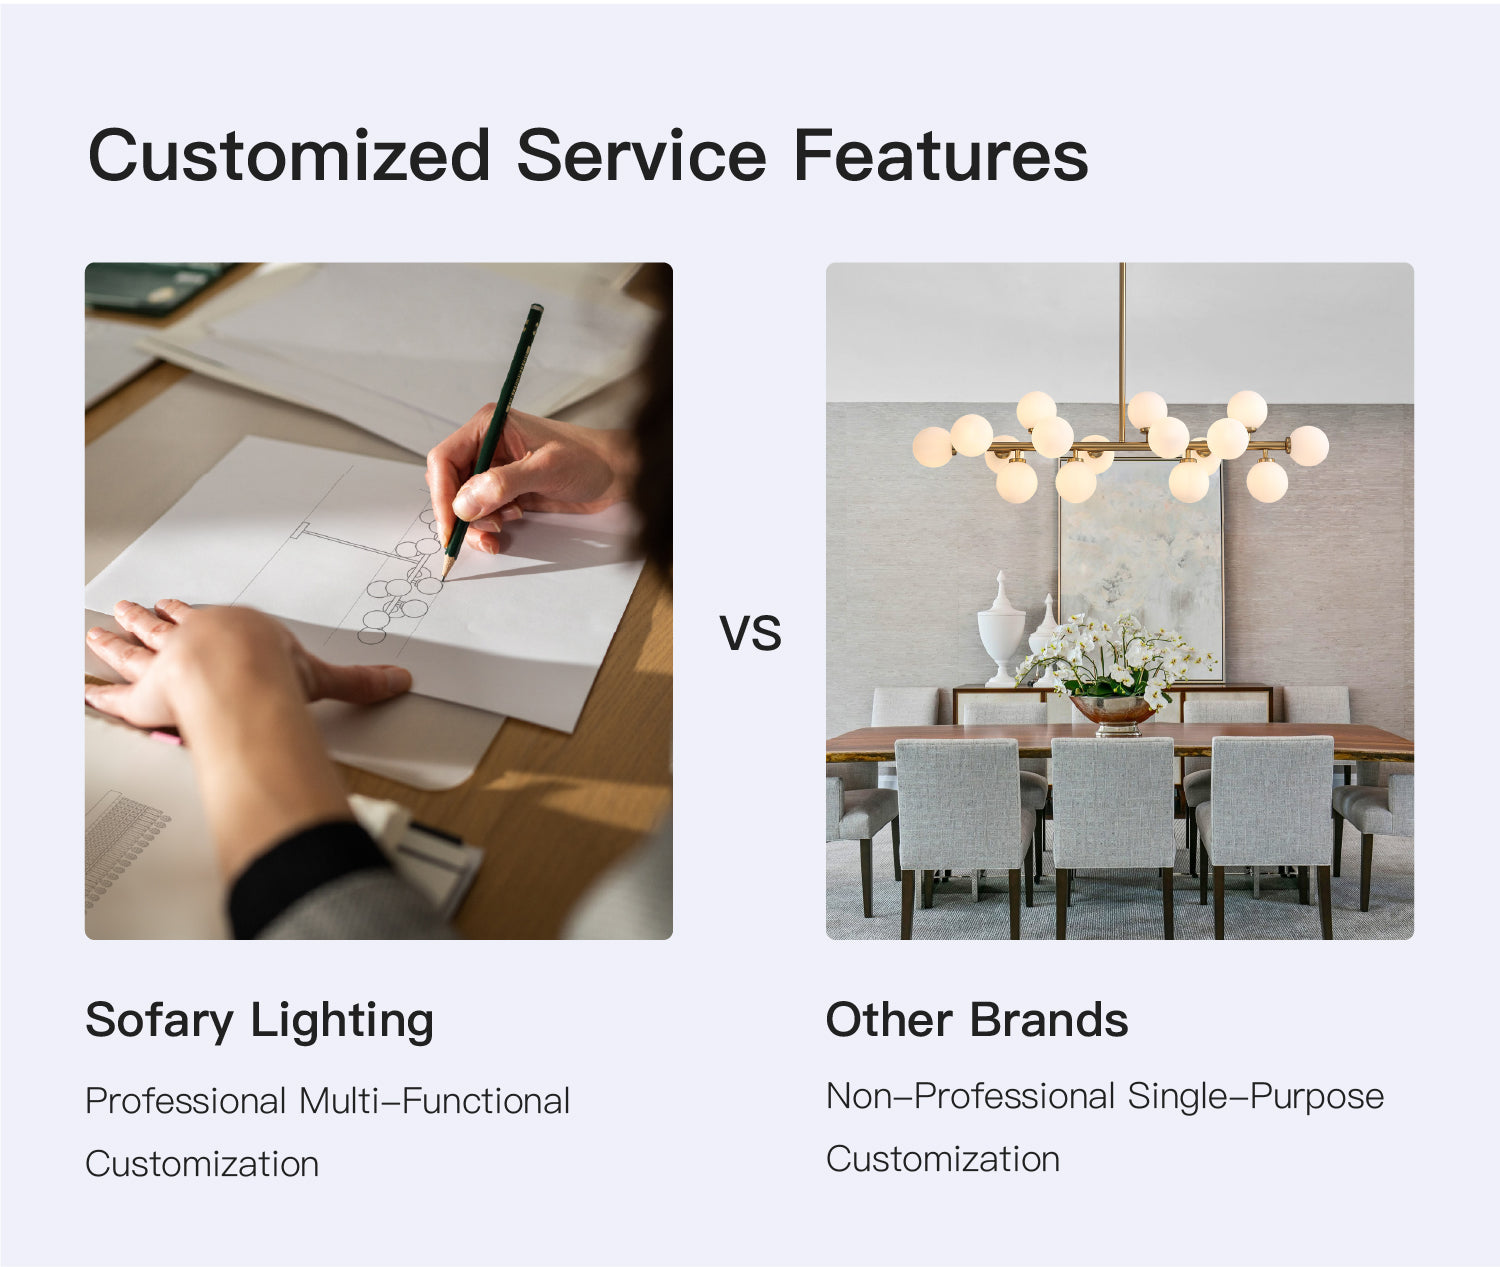 Customized Service Features